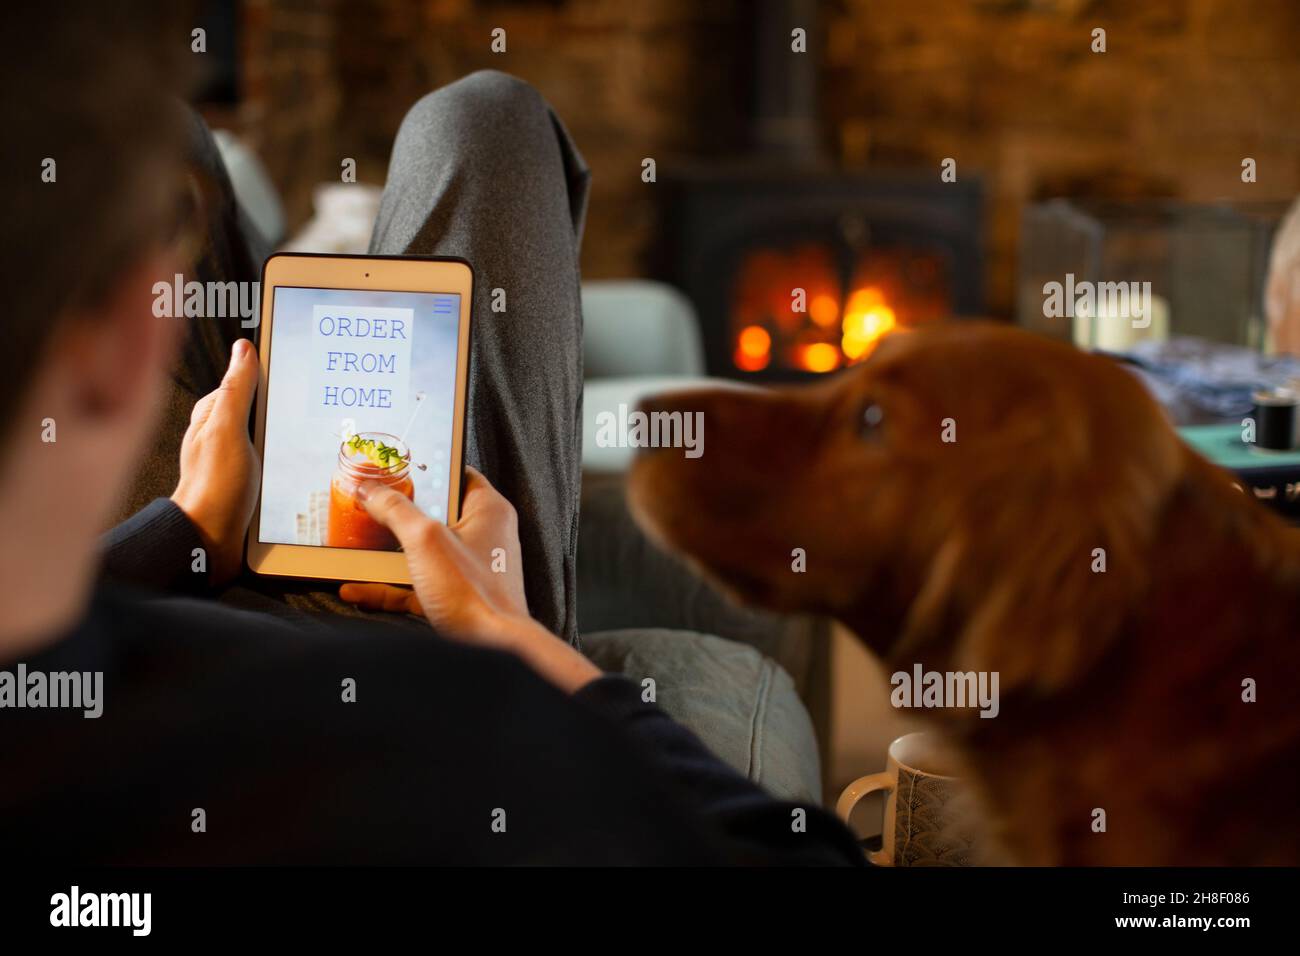 Dog watching man order takeout on digital tablet screen Stock Photo